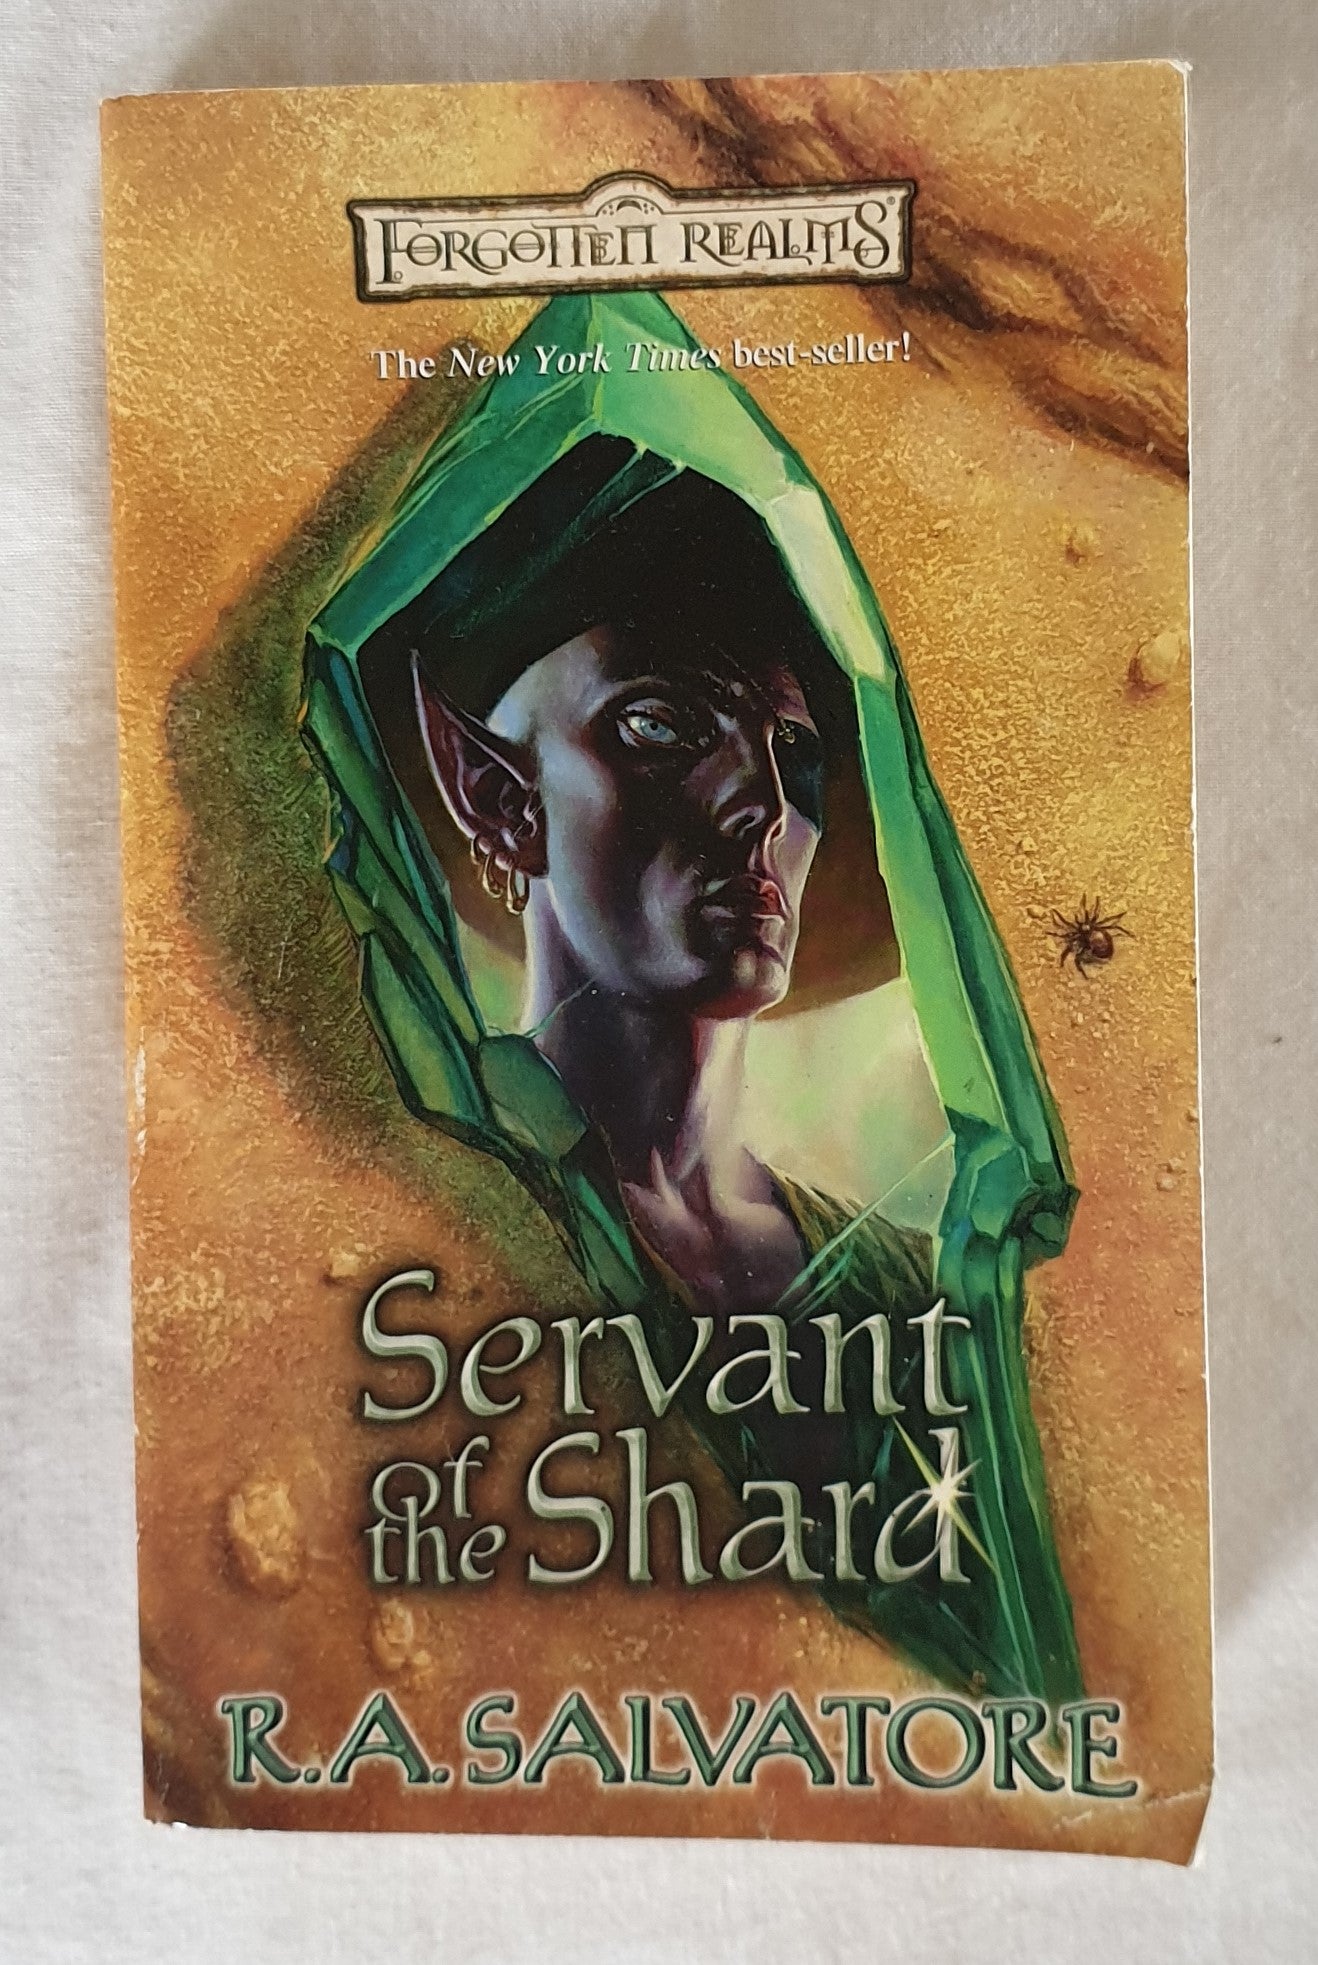 Servant of the Shard by R. A. Salvatore